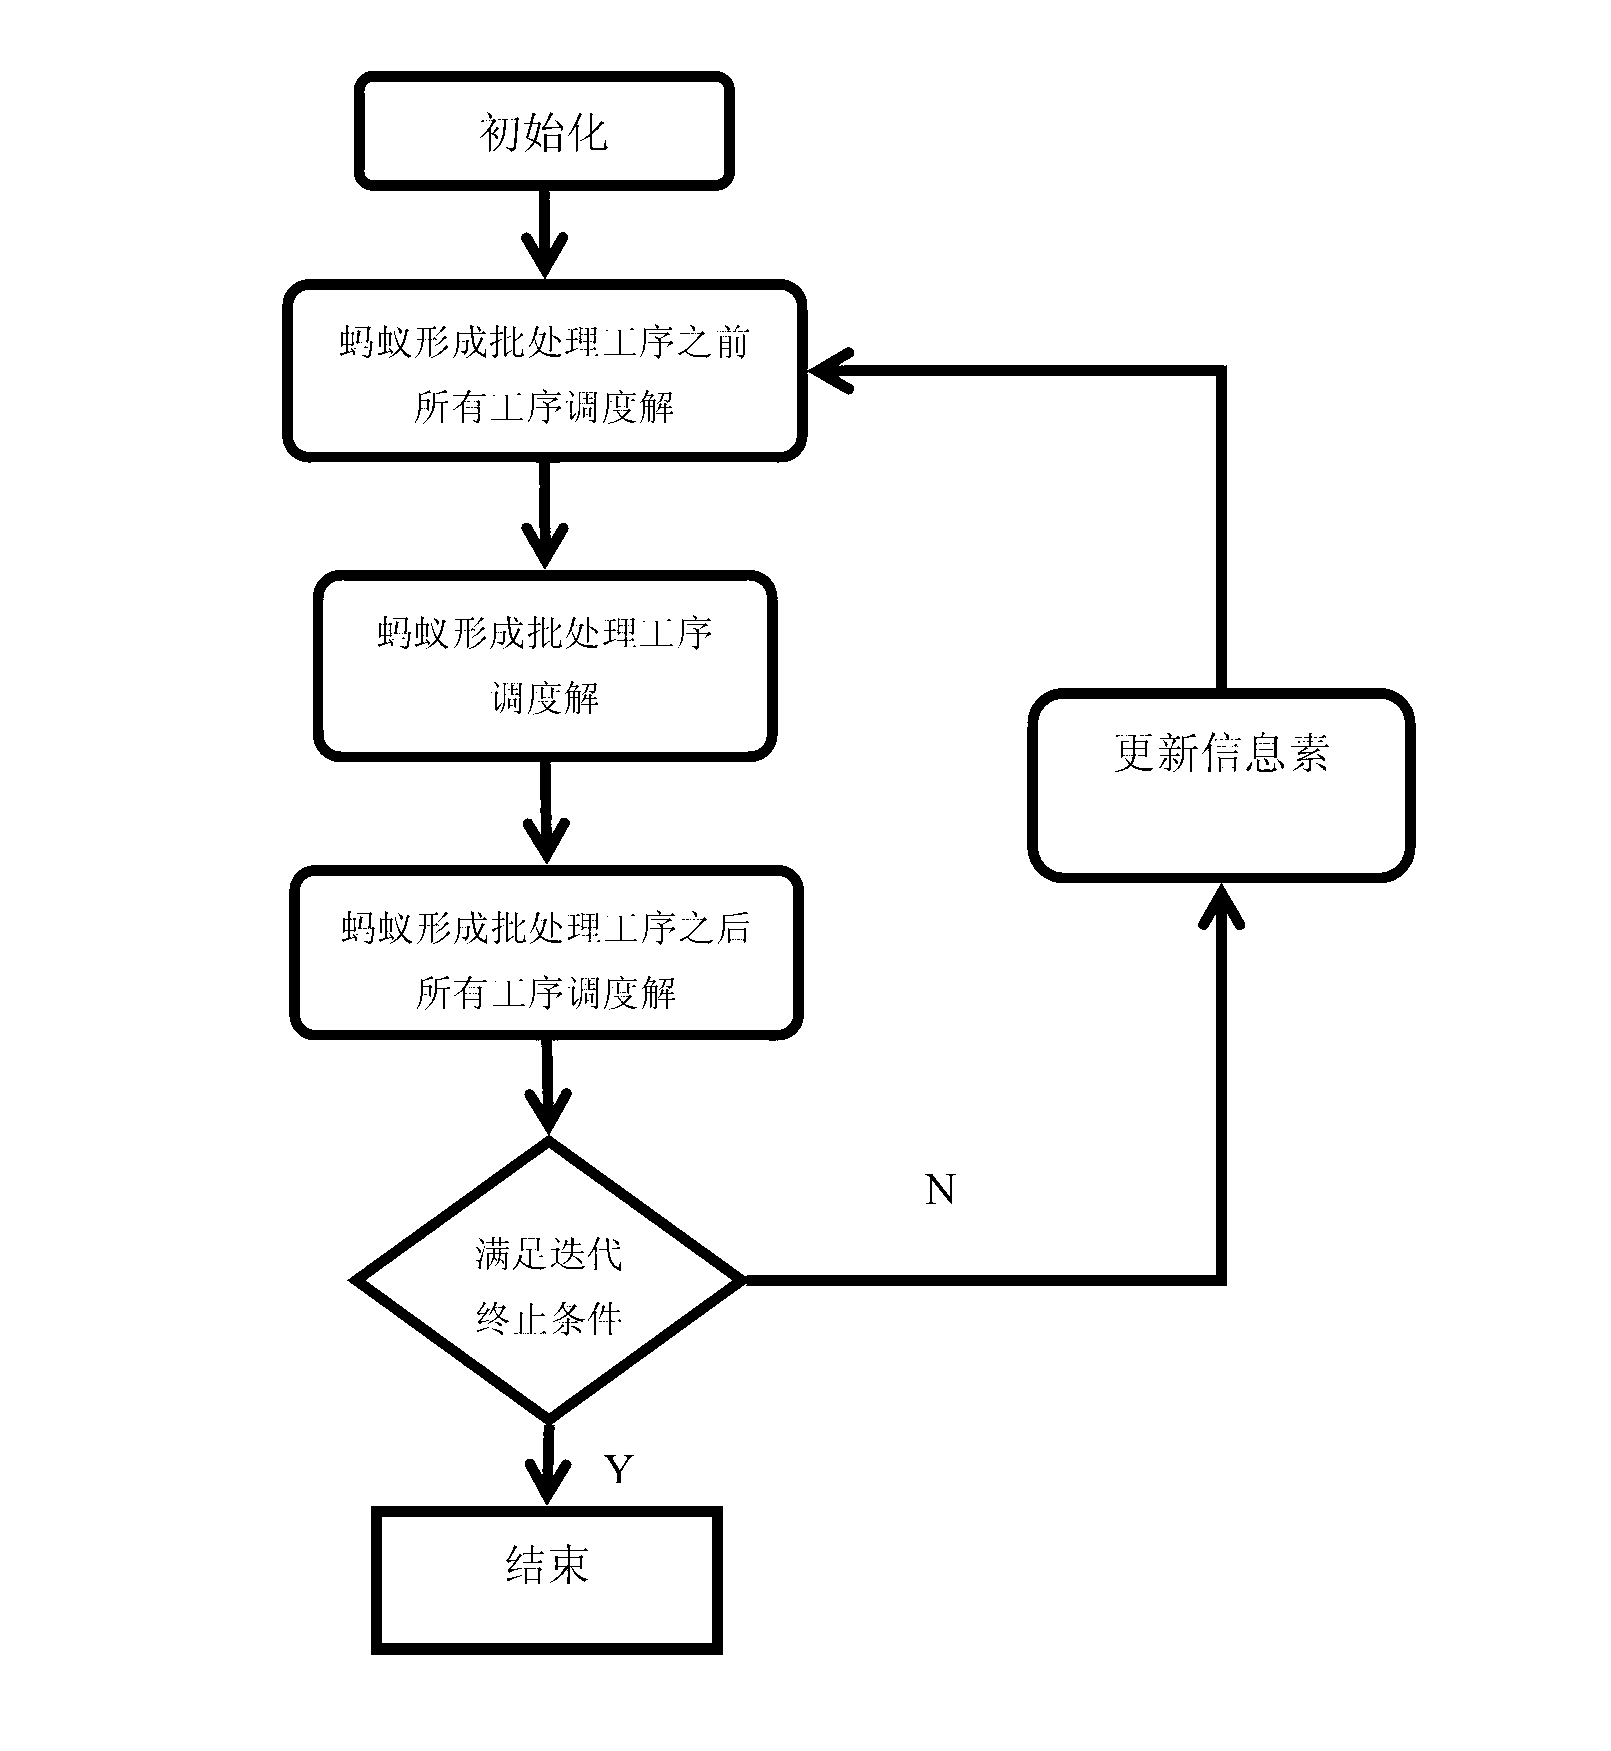 Cross-operation unit scheduling method with batching machine